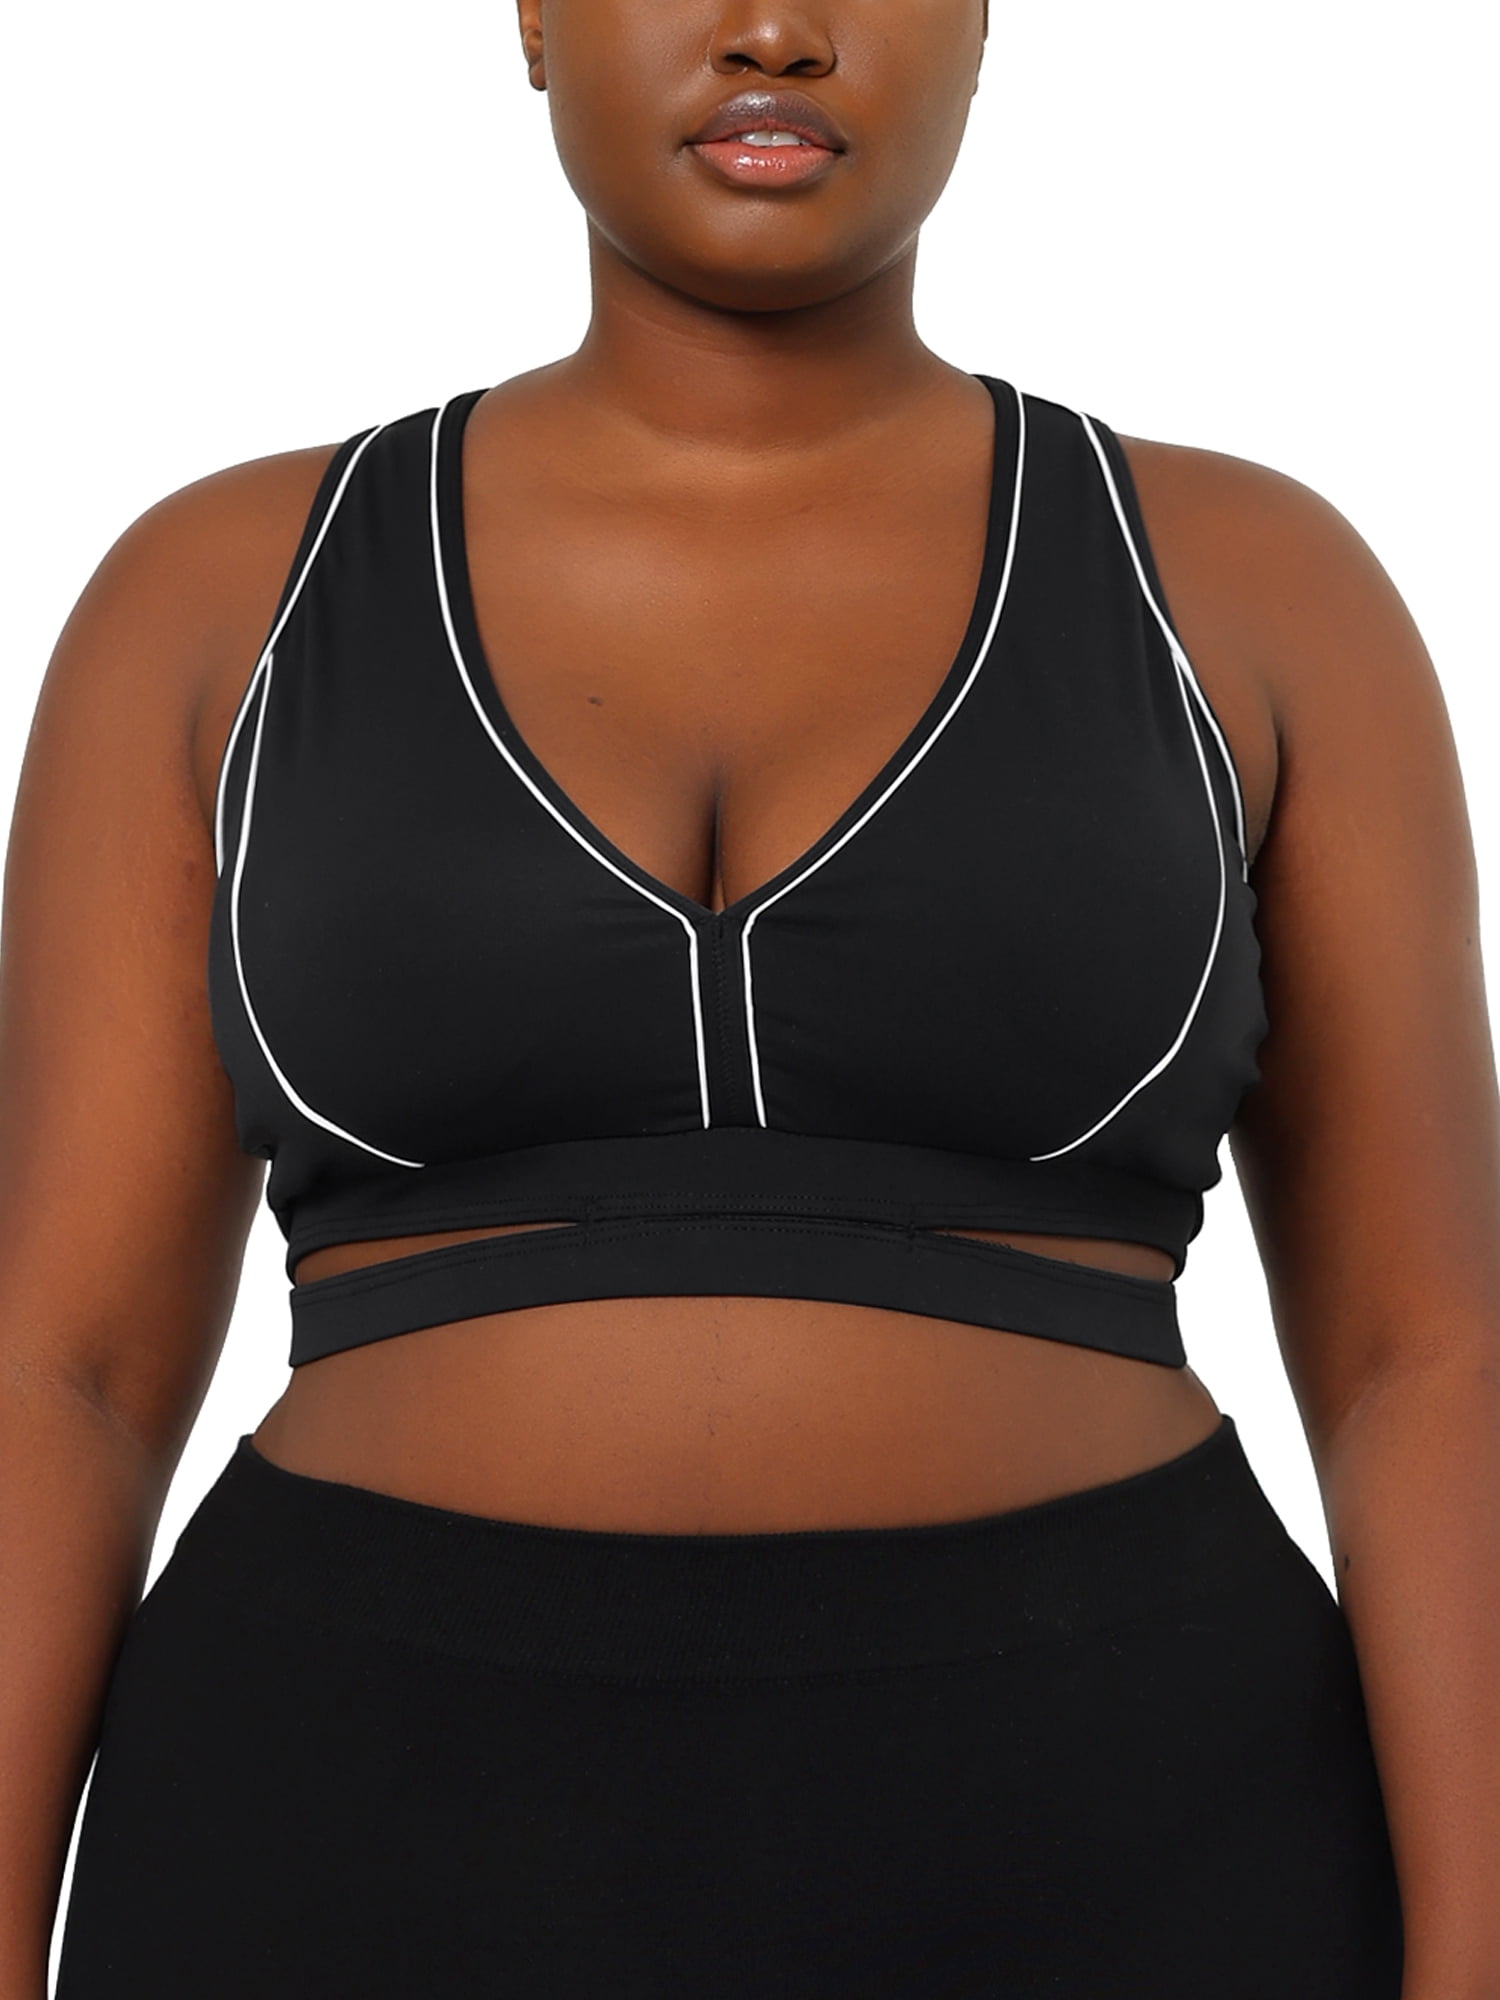 Women's Plus Size High Impact No-Bounce Full Coverage Wire Free Sports Bra